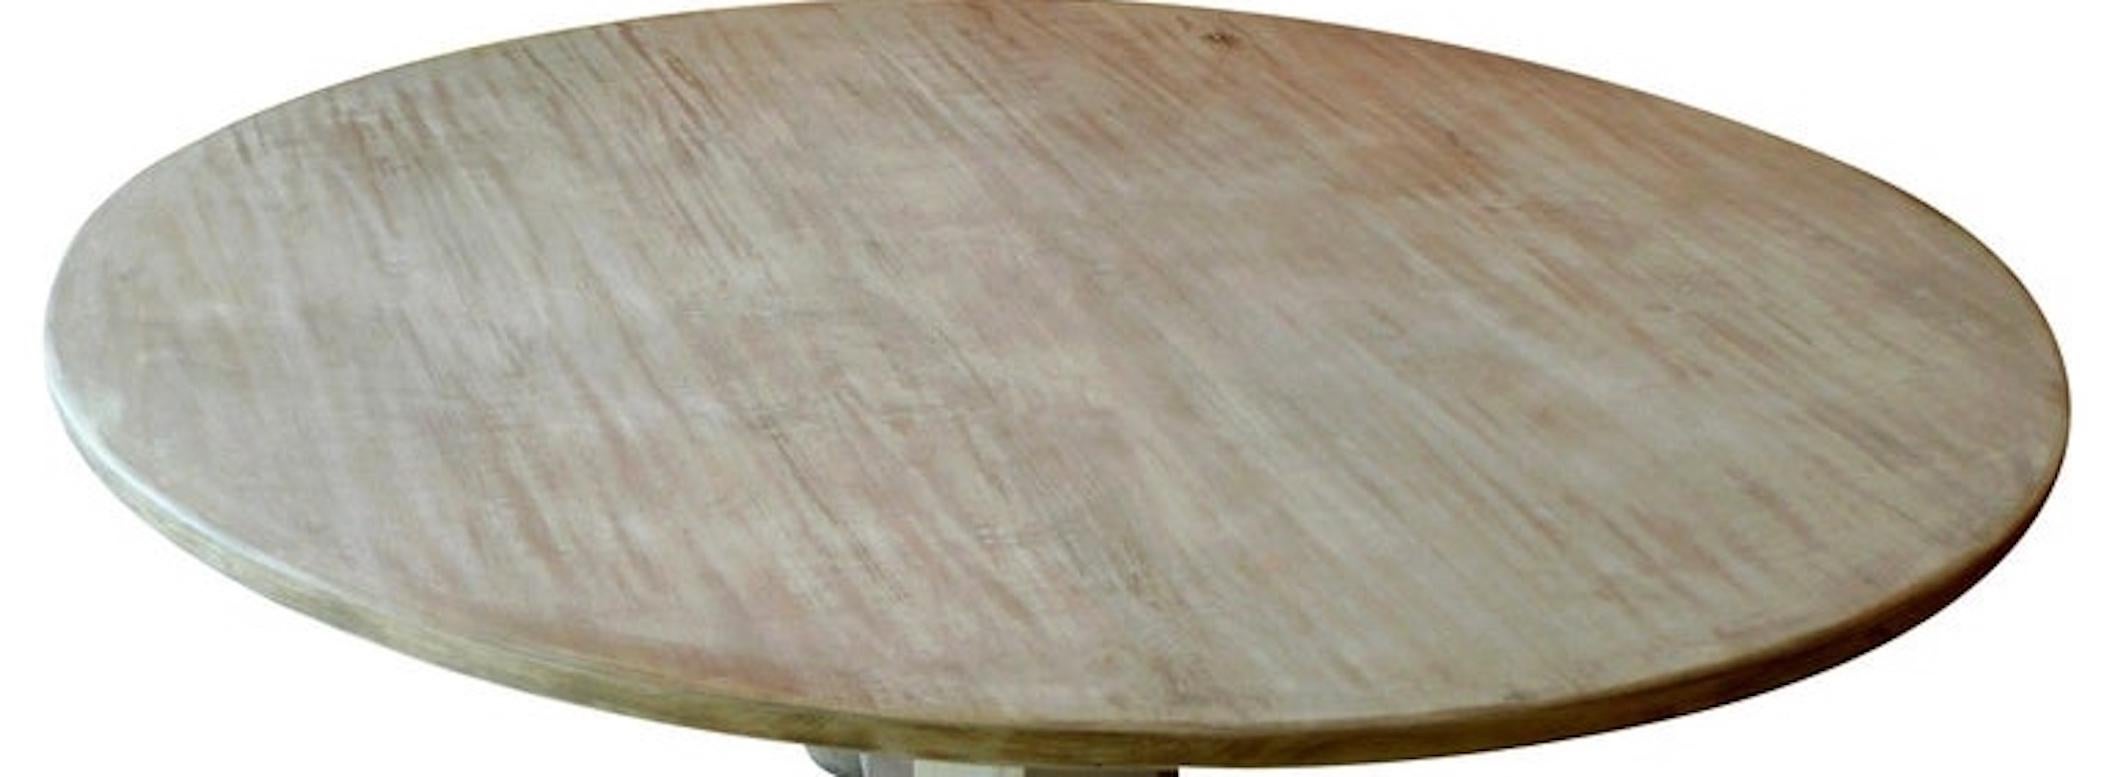 Swedish style alder-wood round pedestal table, made to customers specifications.